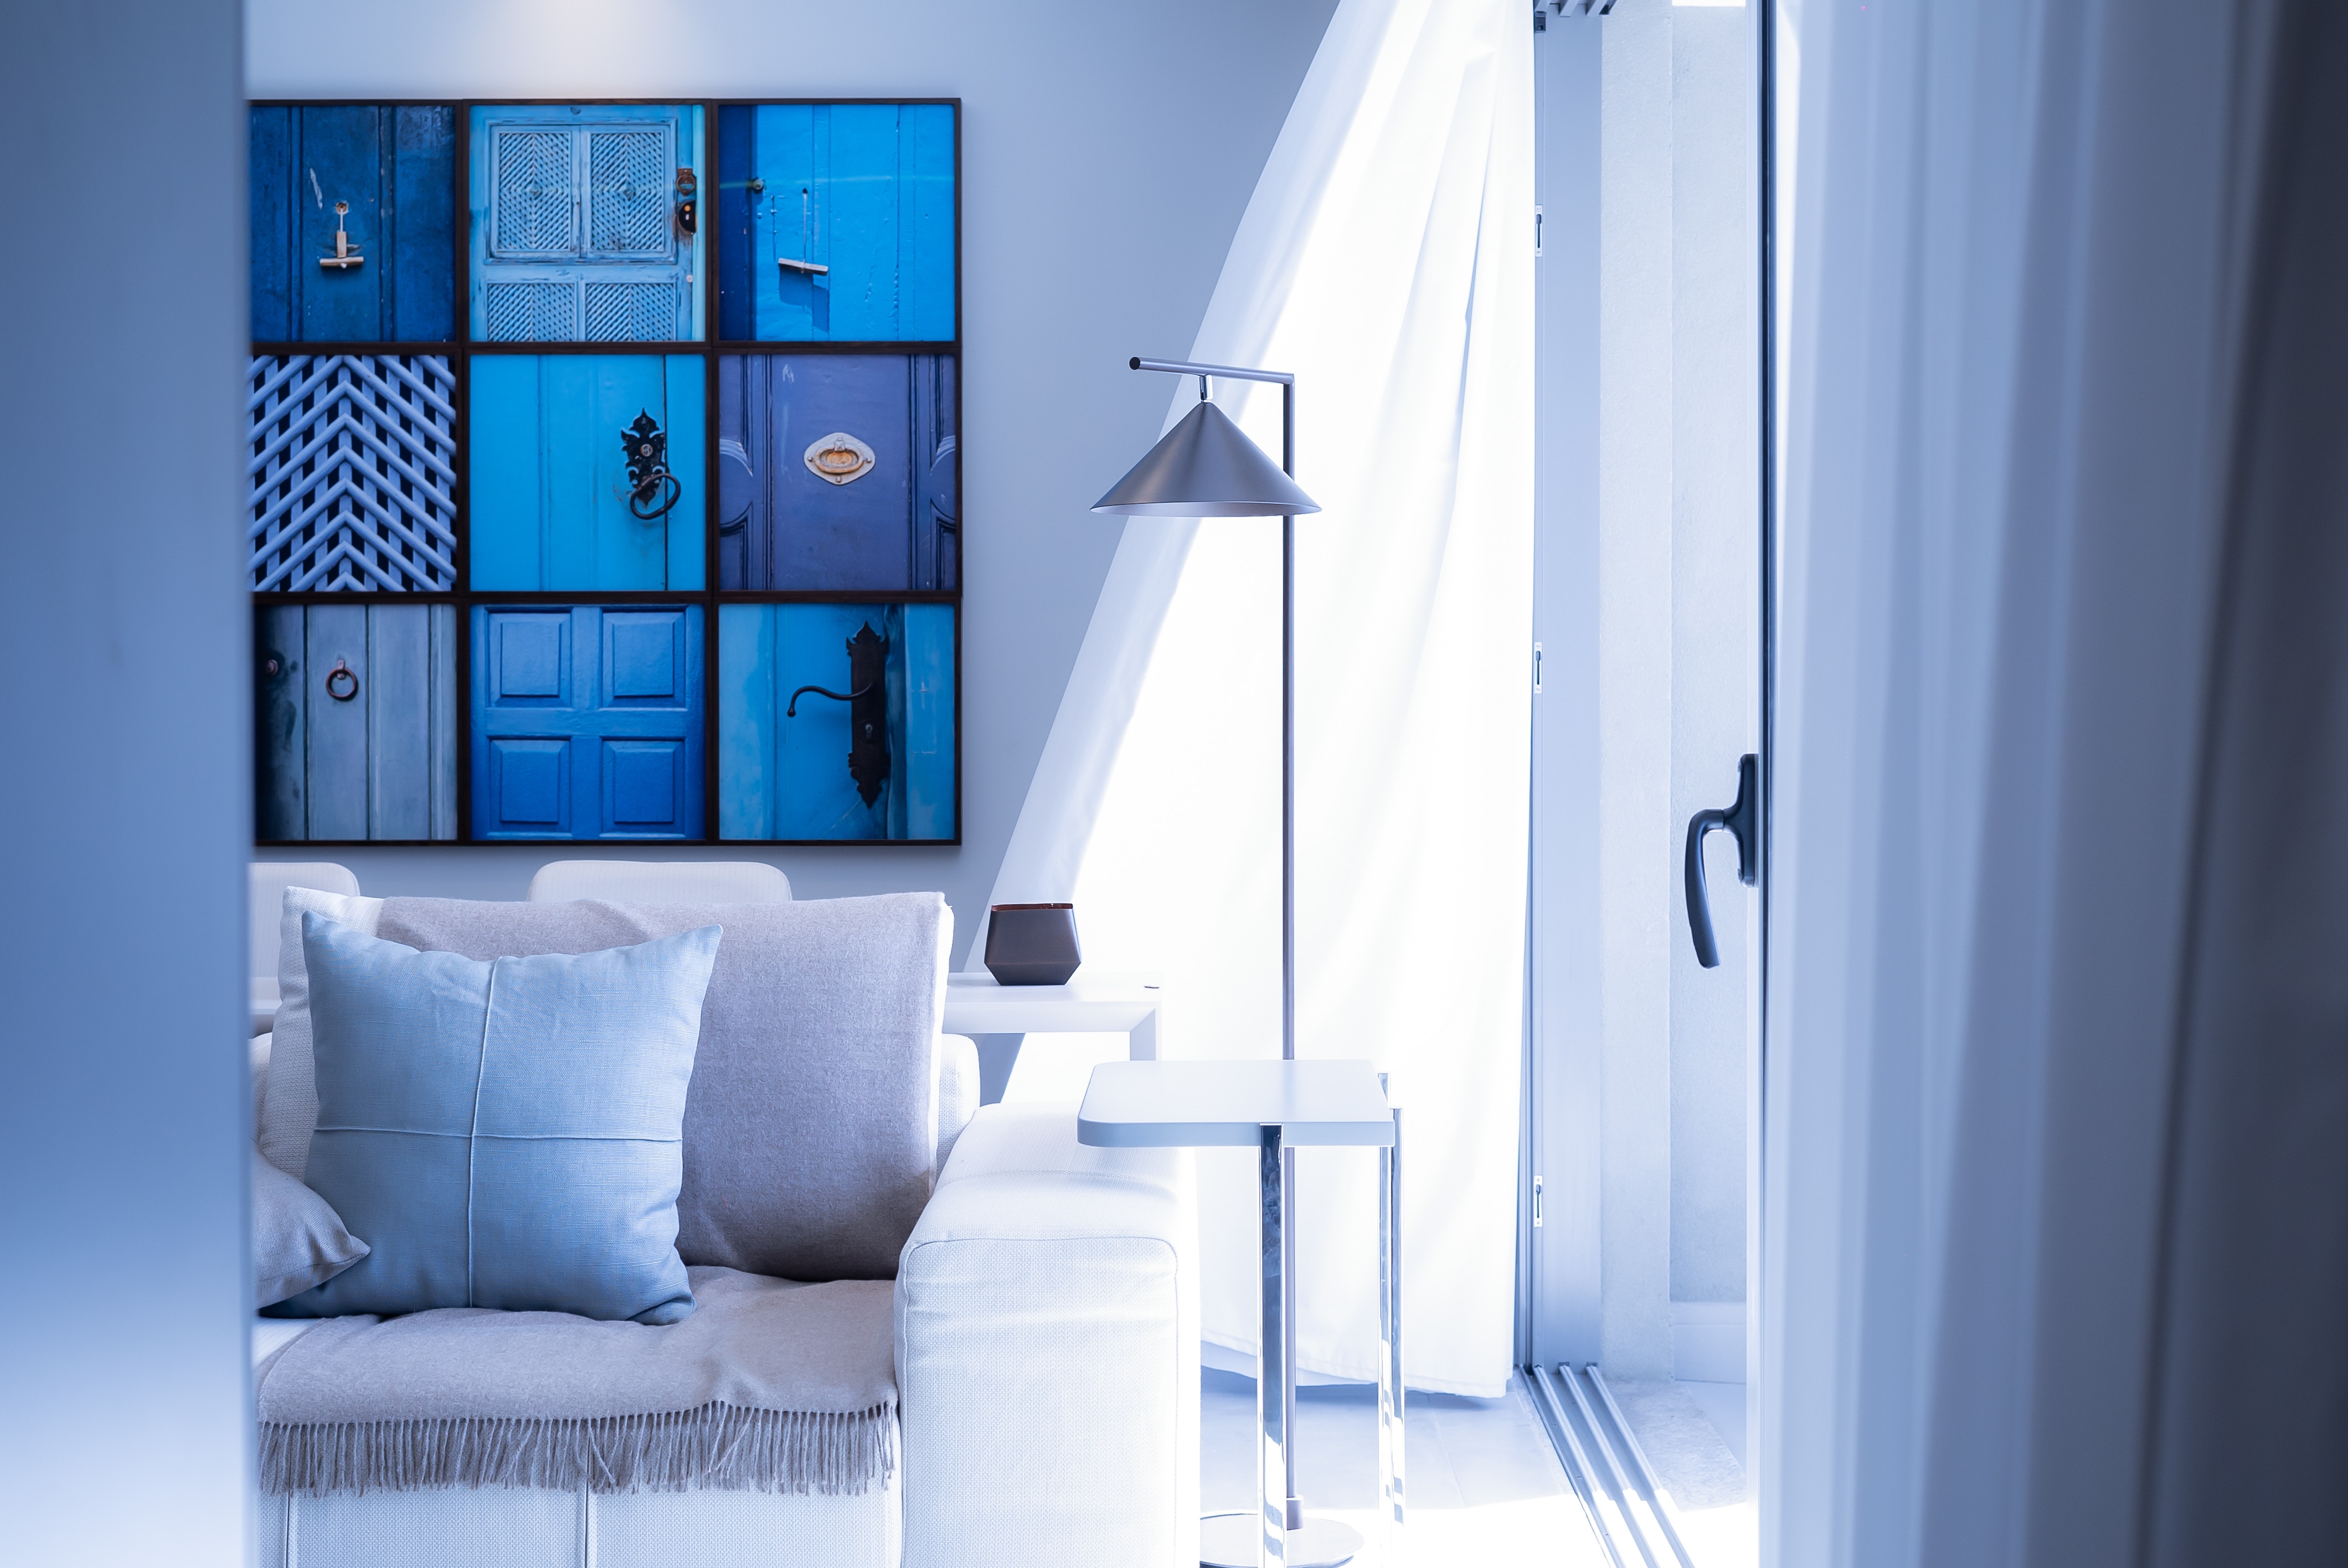 House interior with lamp sofa and blue wall hanging